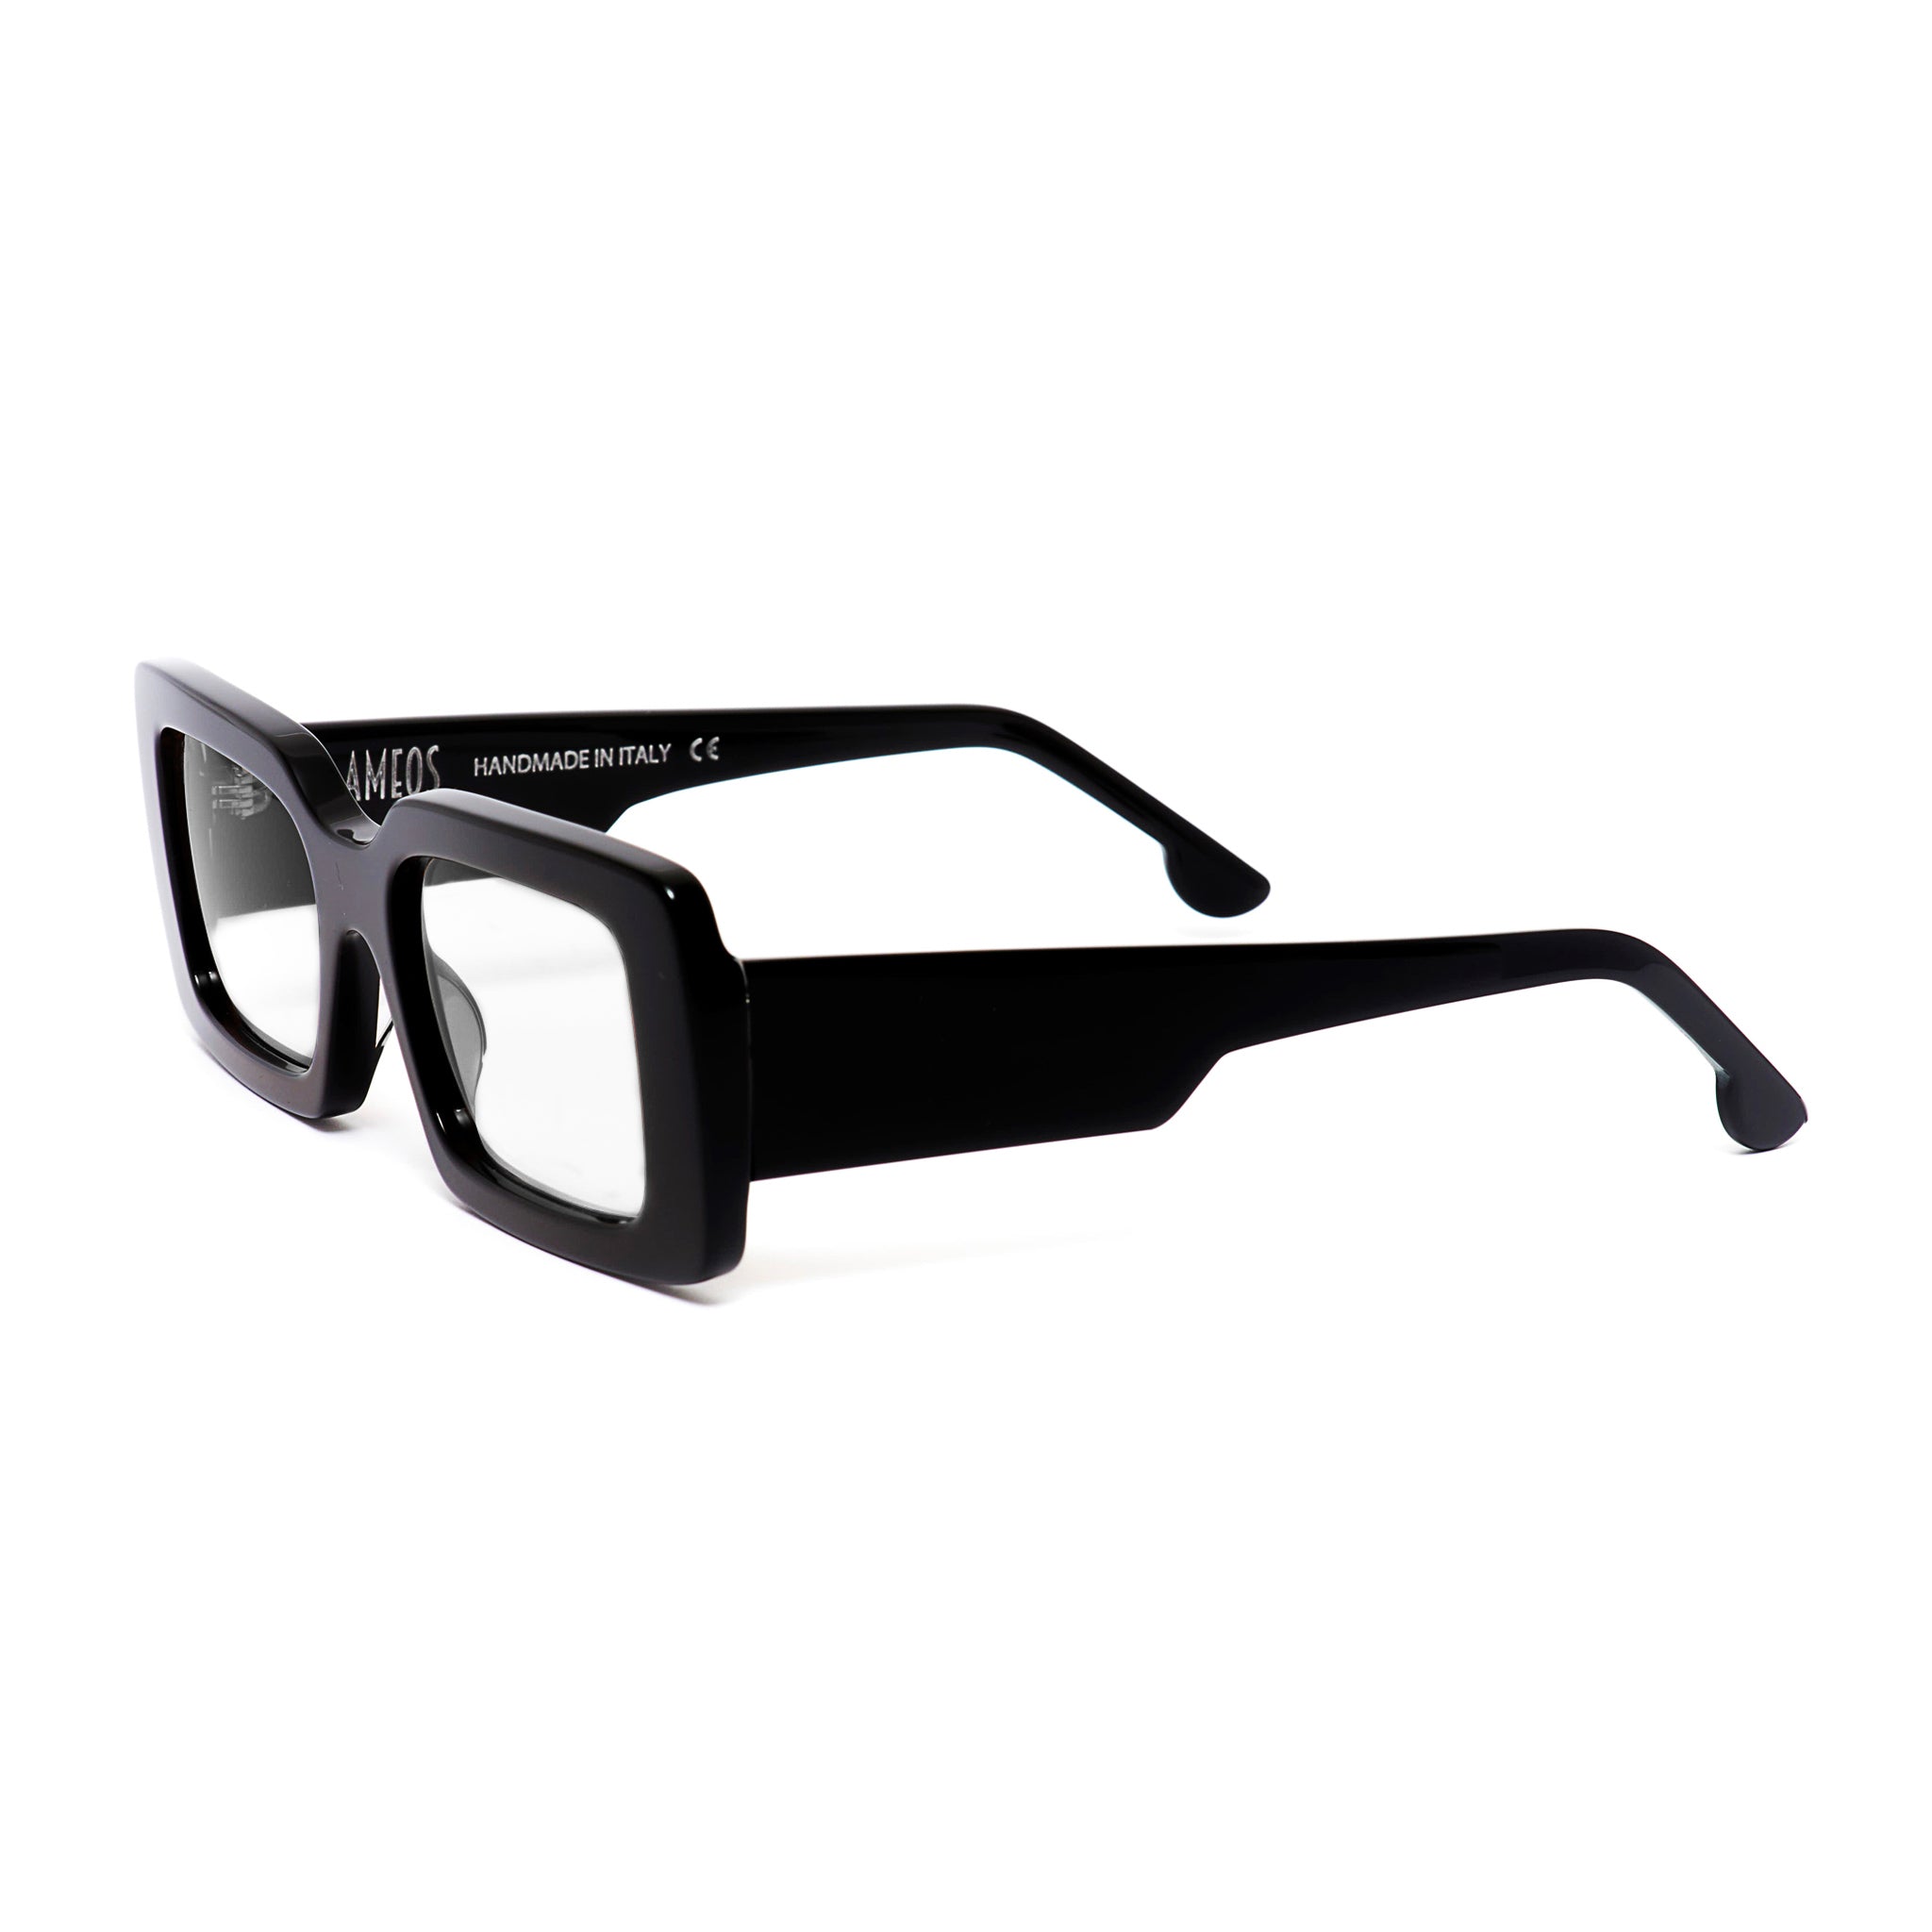 Ameos eyewear alexis optical glasses in black frames. Unisex and handmade in Italy.